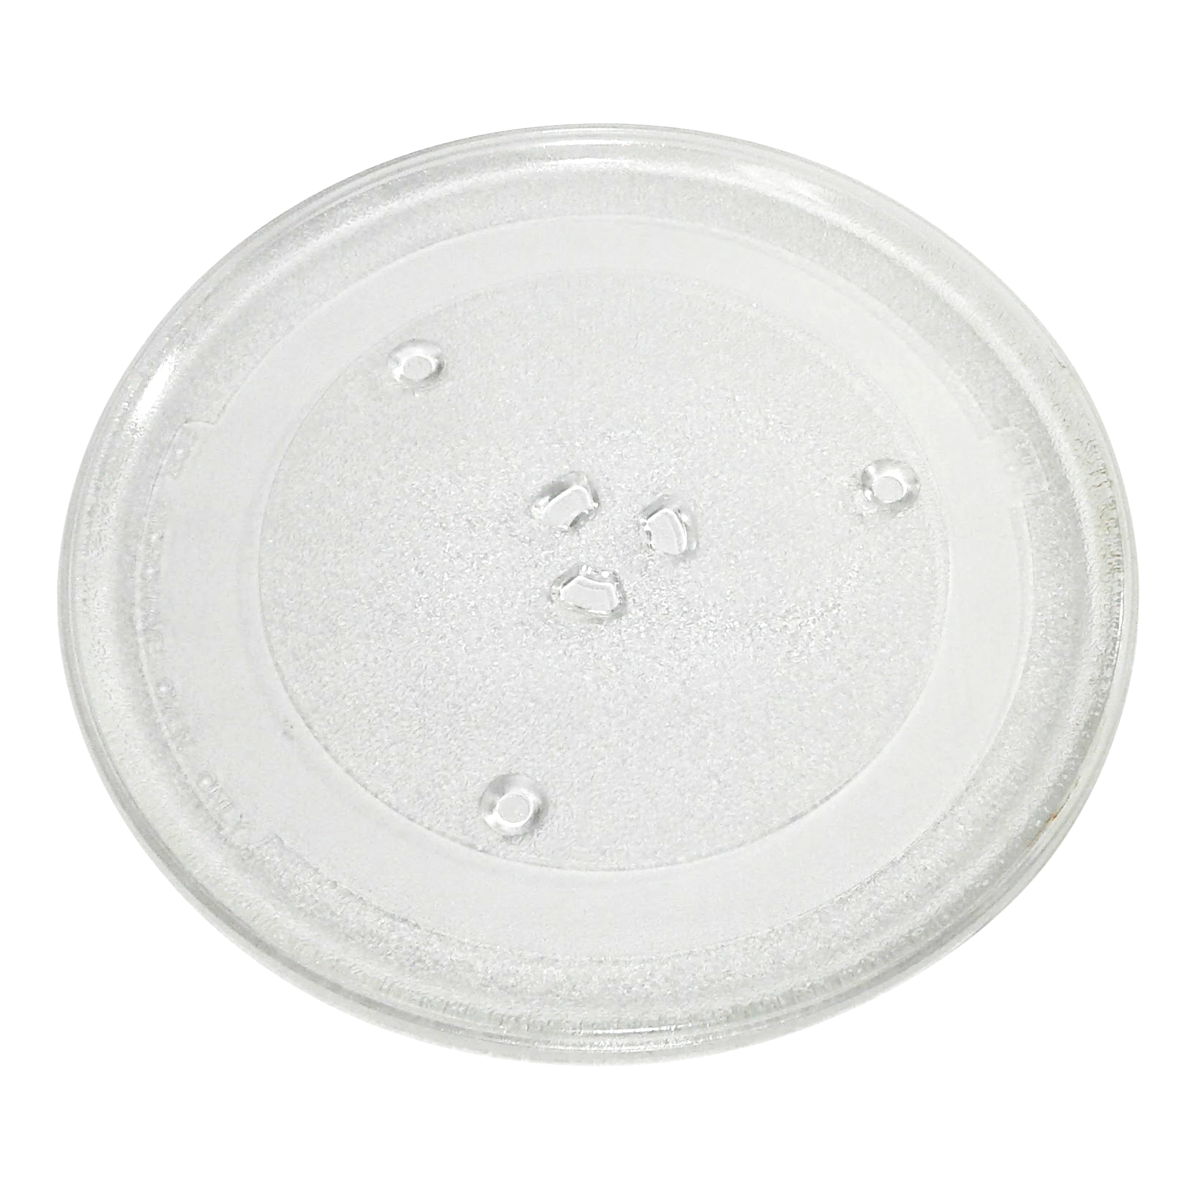 Replacement Microwave Plate 10.5in Universal for JVM1540DP1WW